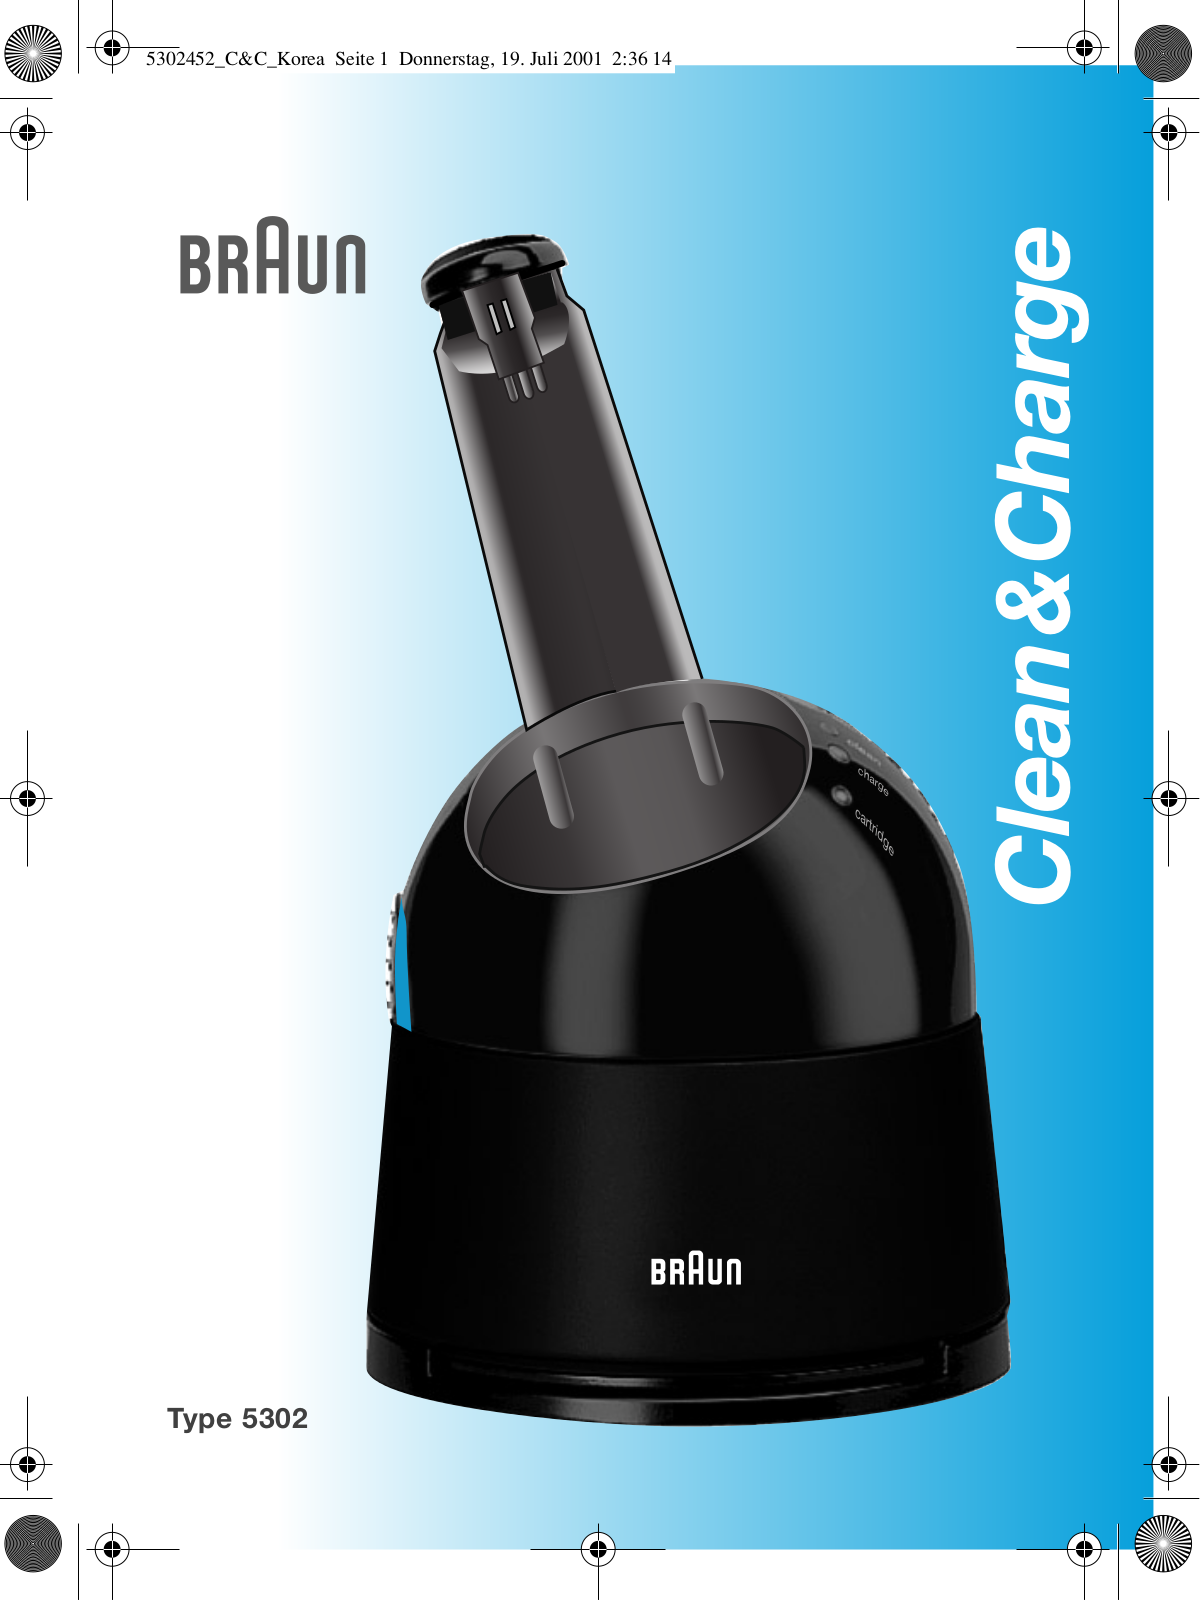 Braun CLEAN AND CHARGE Quick start guide